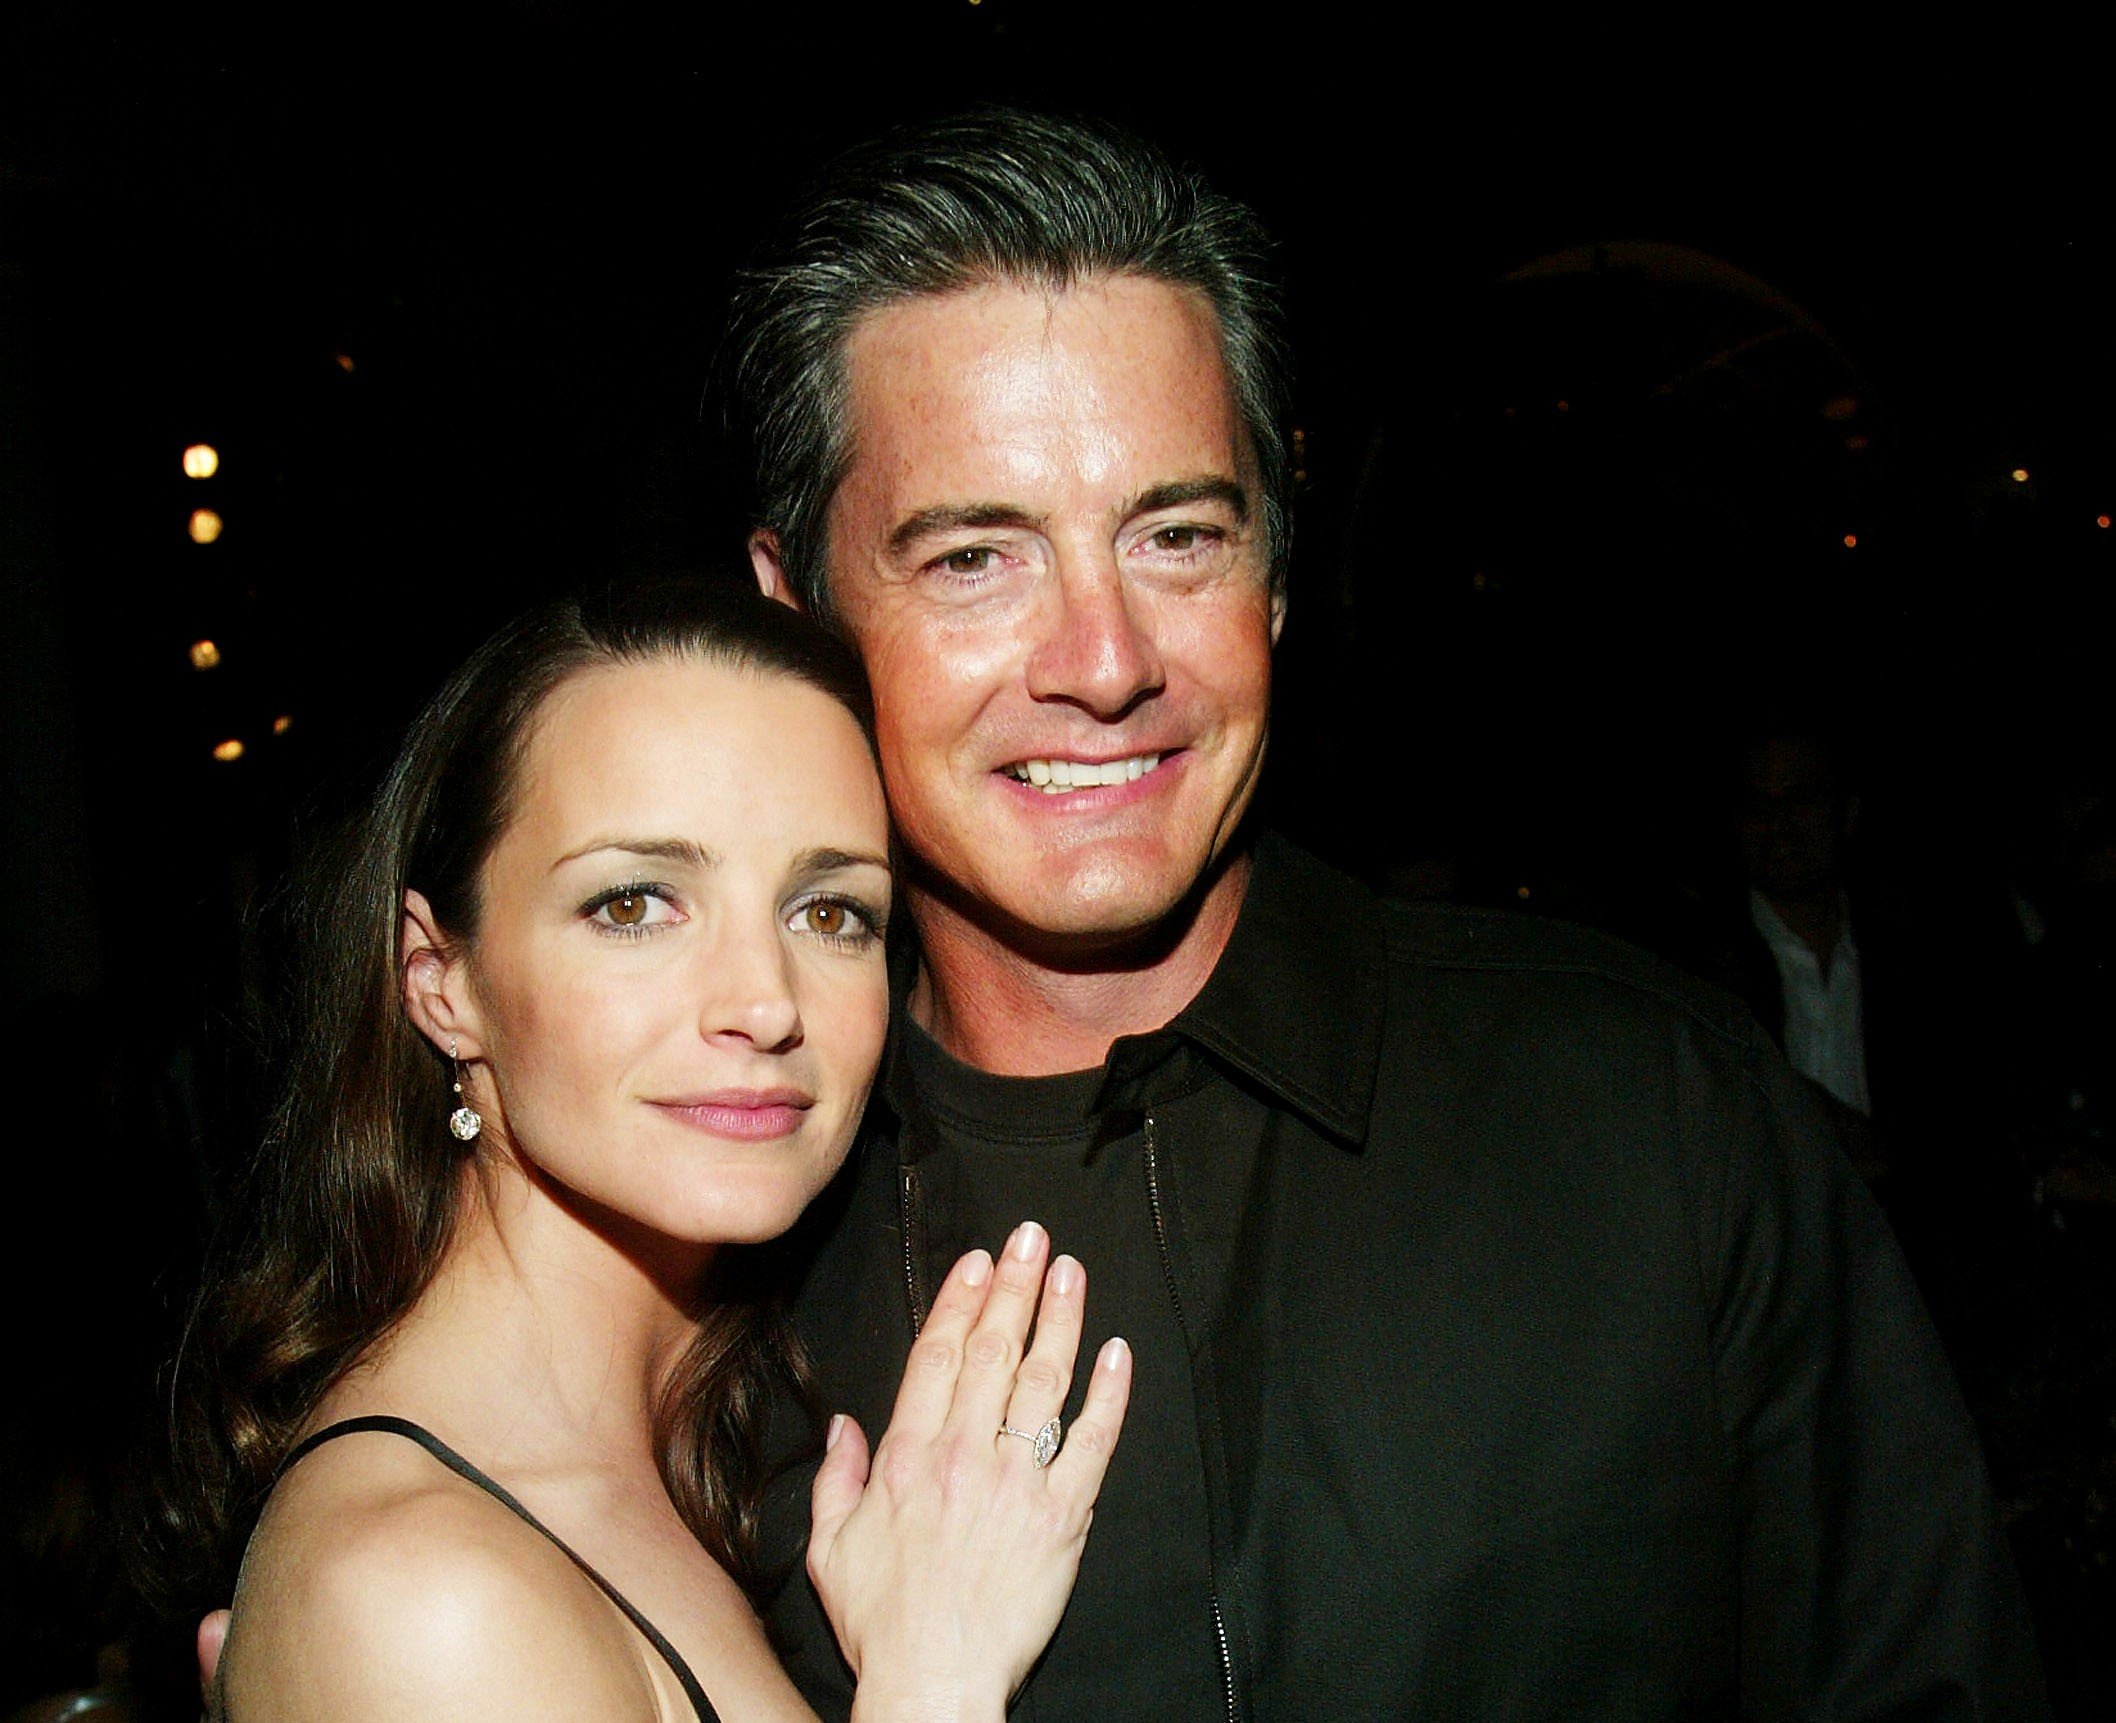 Kristin Davis and Kyle MacLachlan attend the 'Sex and the City' season premiere. Trey MacDougal's 'Sex and the City' storyline felt incomplete